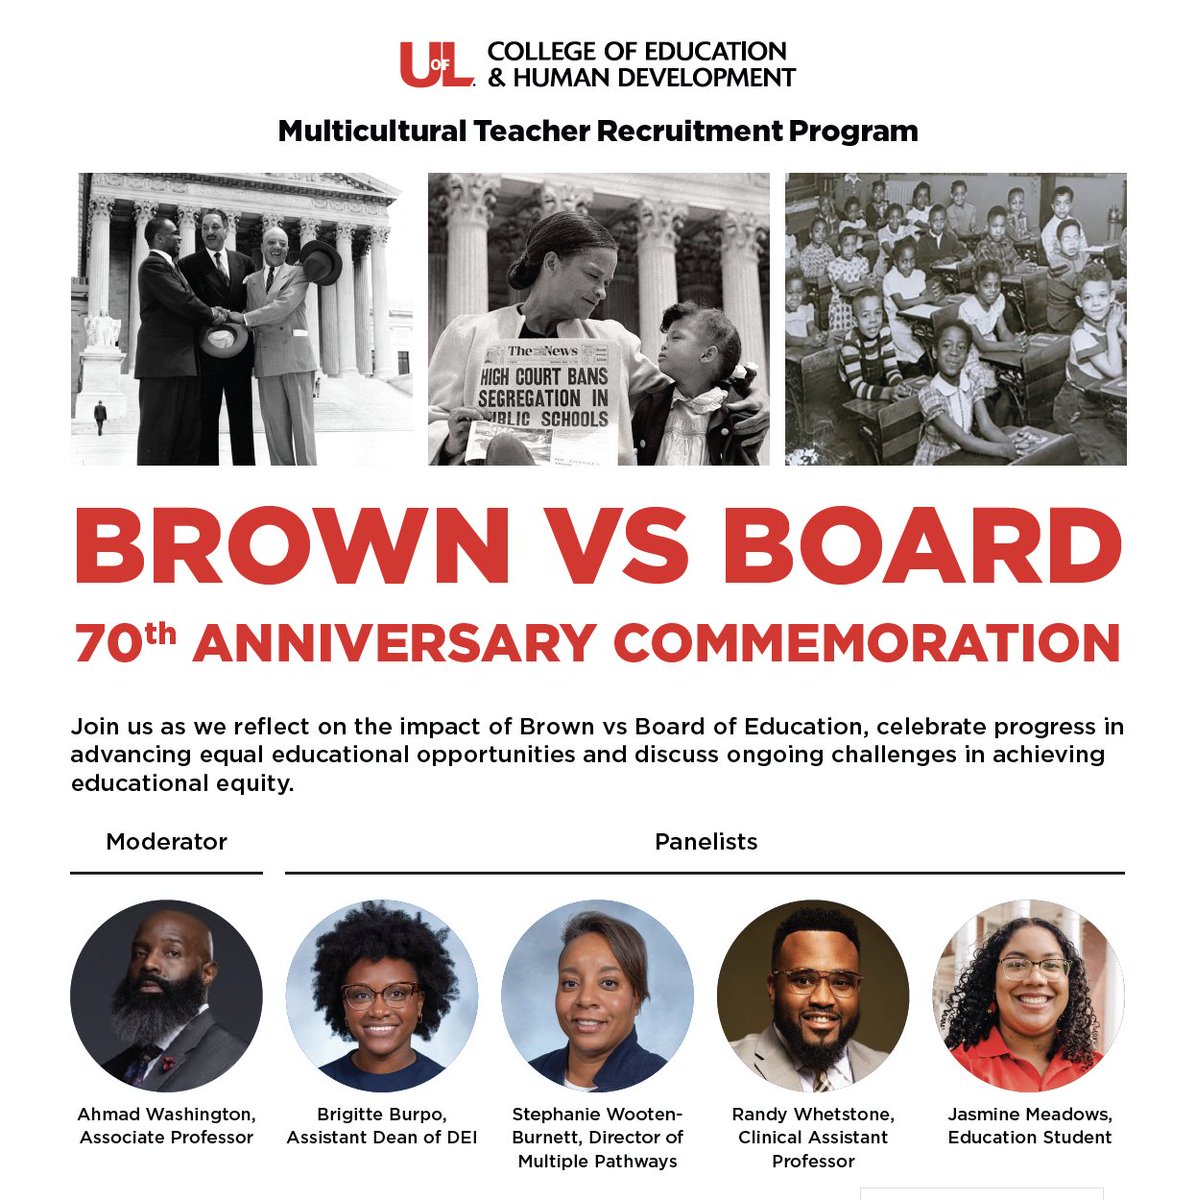 Join @ULMTRP next week for the Brown vs Board of Education 70th Anniversary Commemoration. A moderated panel will include CEHD faculty and students. 🗓️ Wednesday, April 10 at 4:30 📍 Gheens Science Hall and Rauch Planetarium ✅ Register here: bit.ly/3TMykQ2